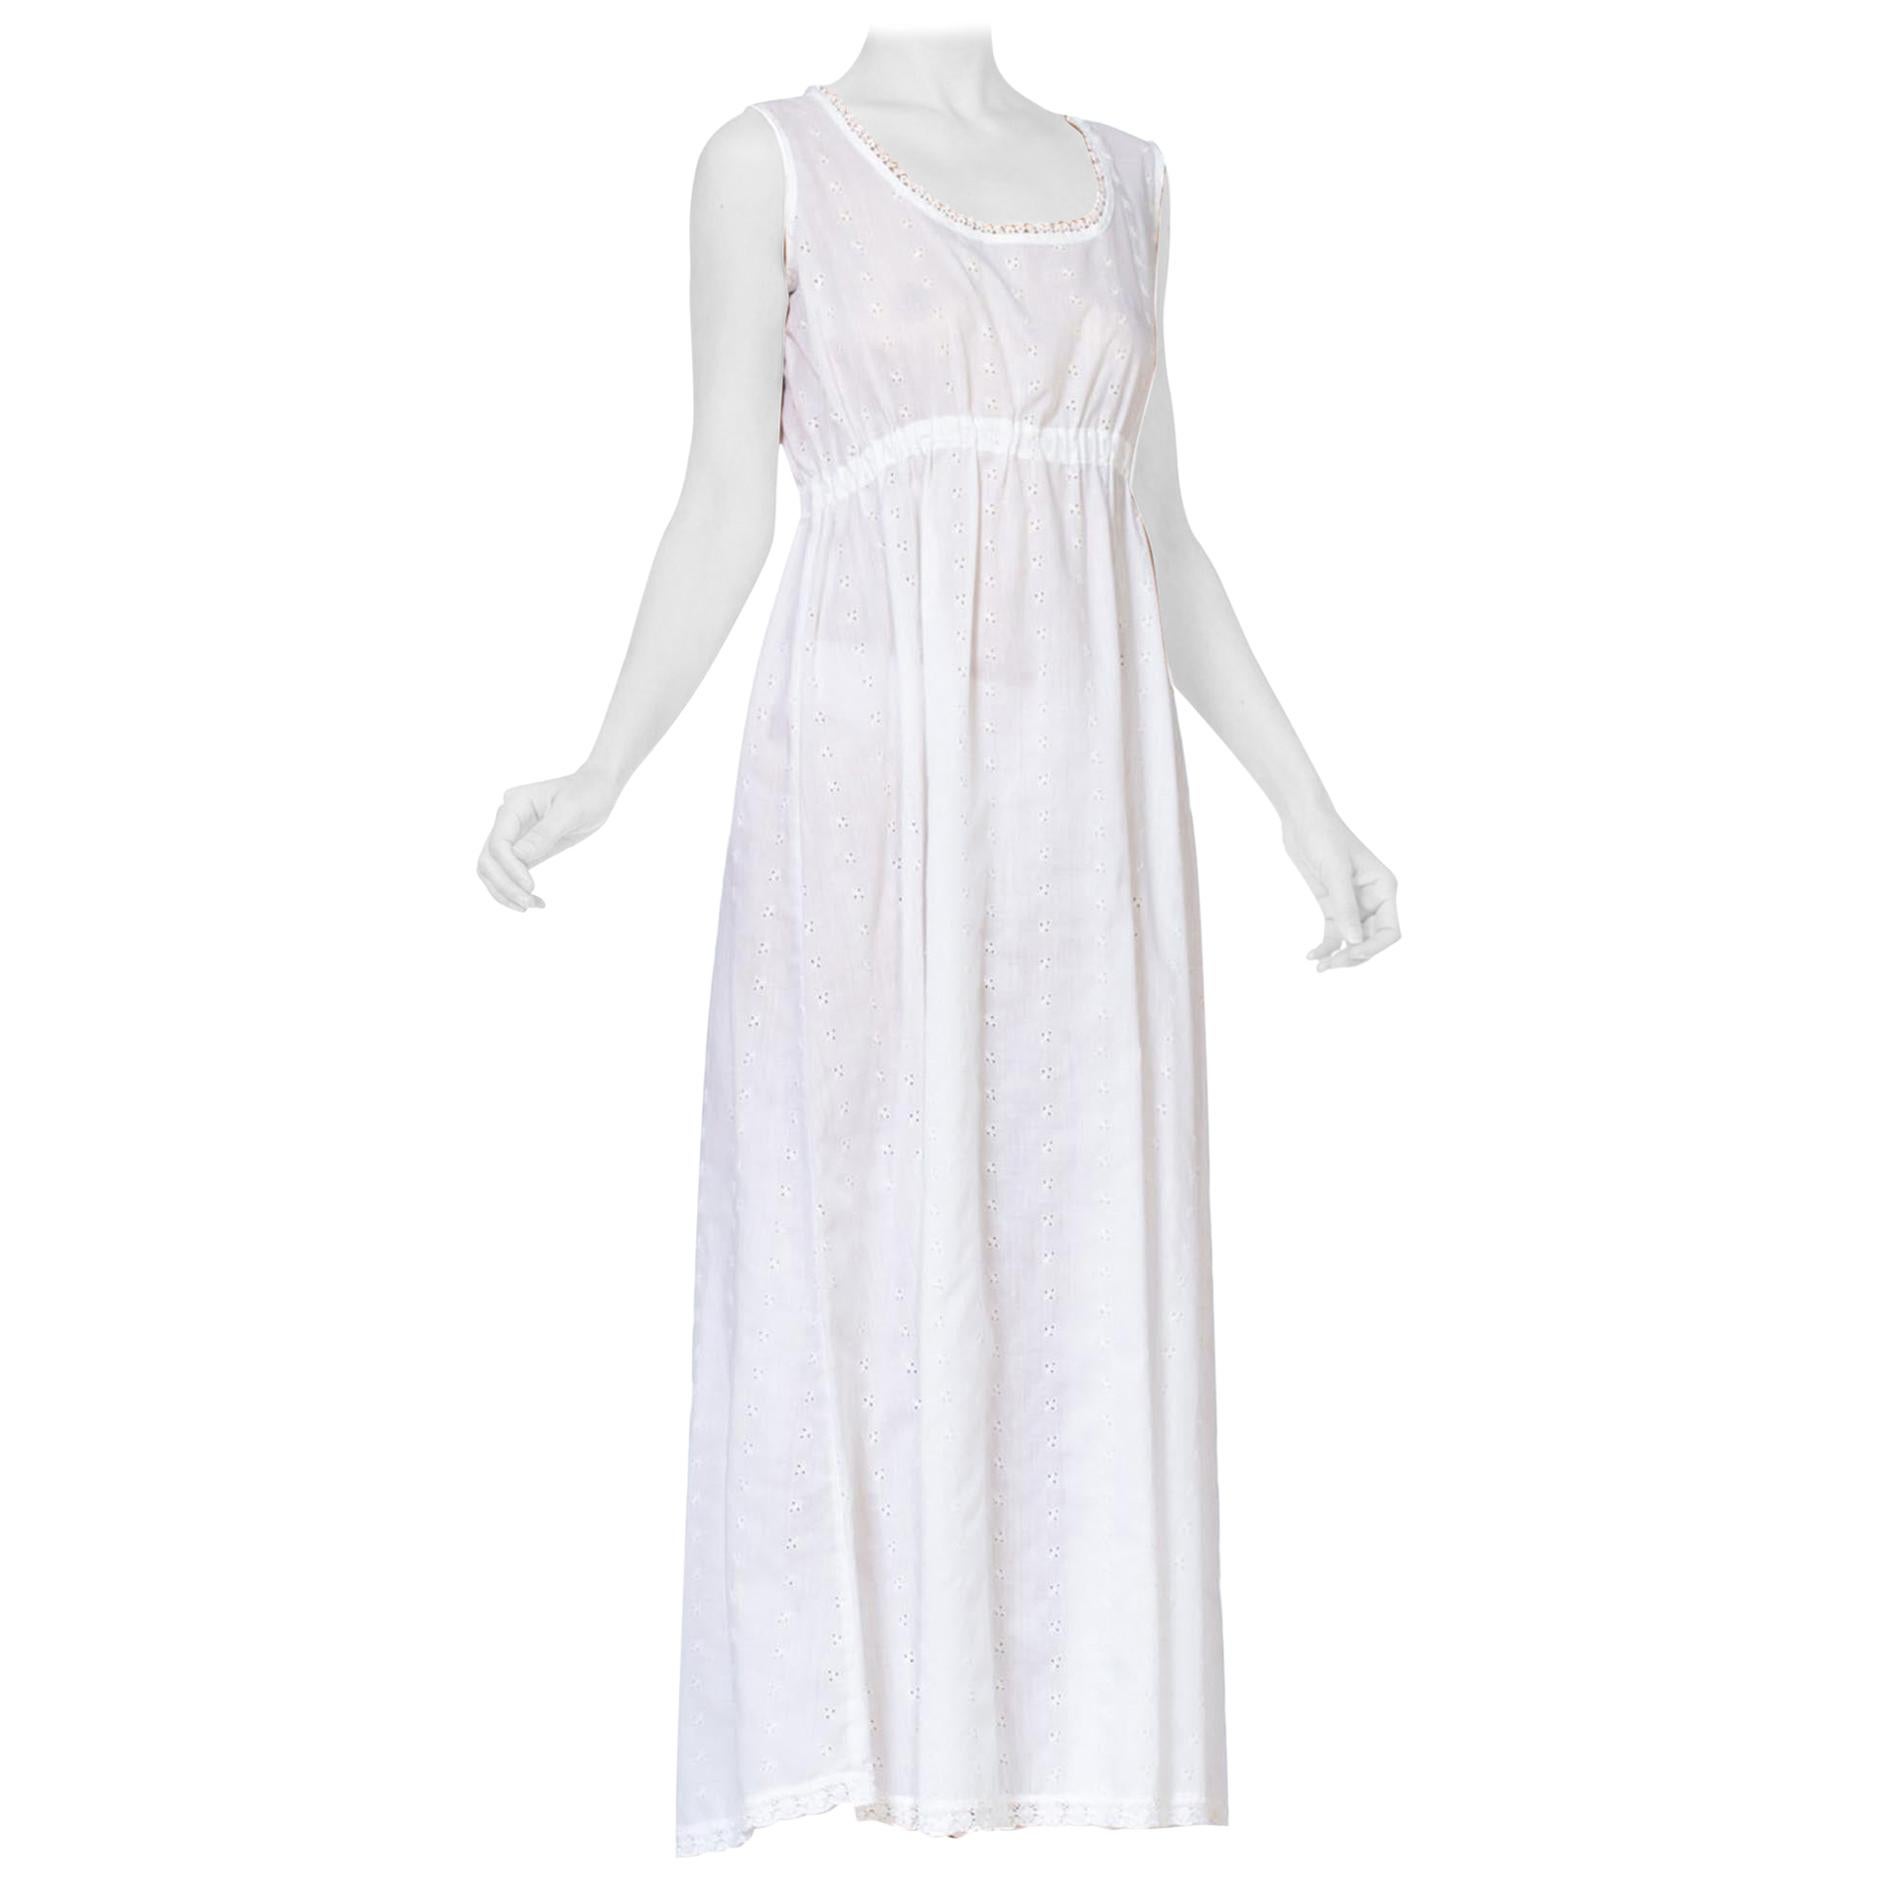 1970S White Embroidered Cotton Blend Eyelet Lace Negligee & Duster Robe Set For Sale